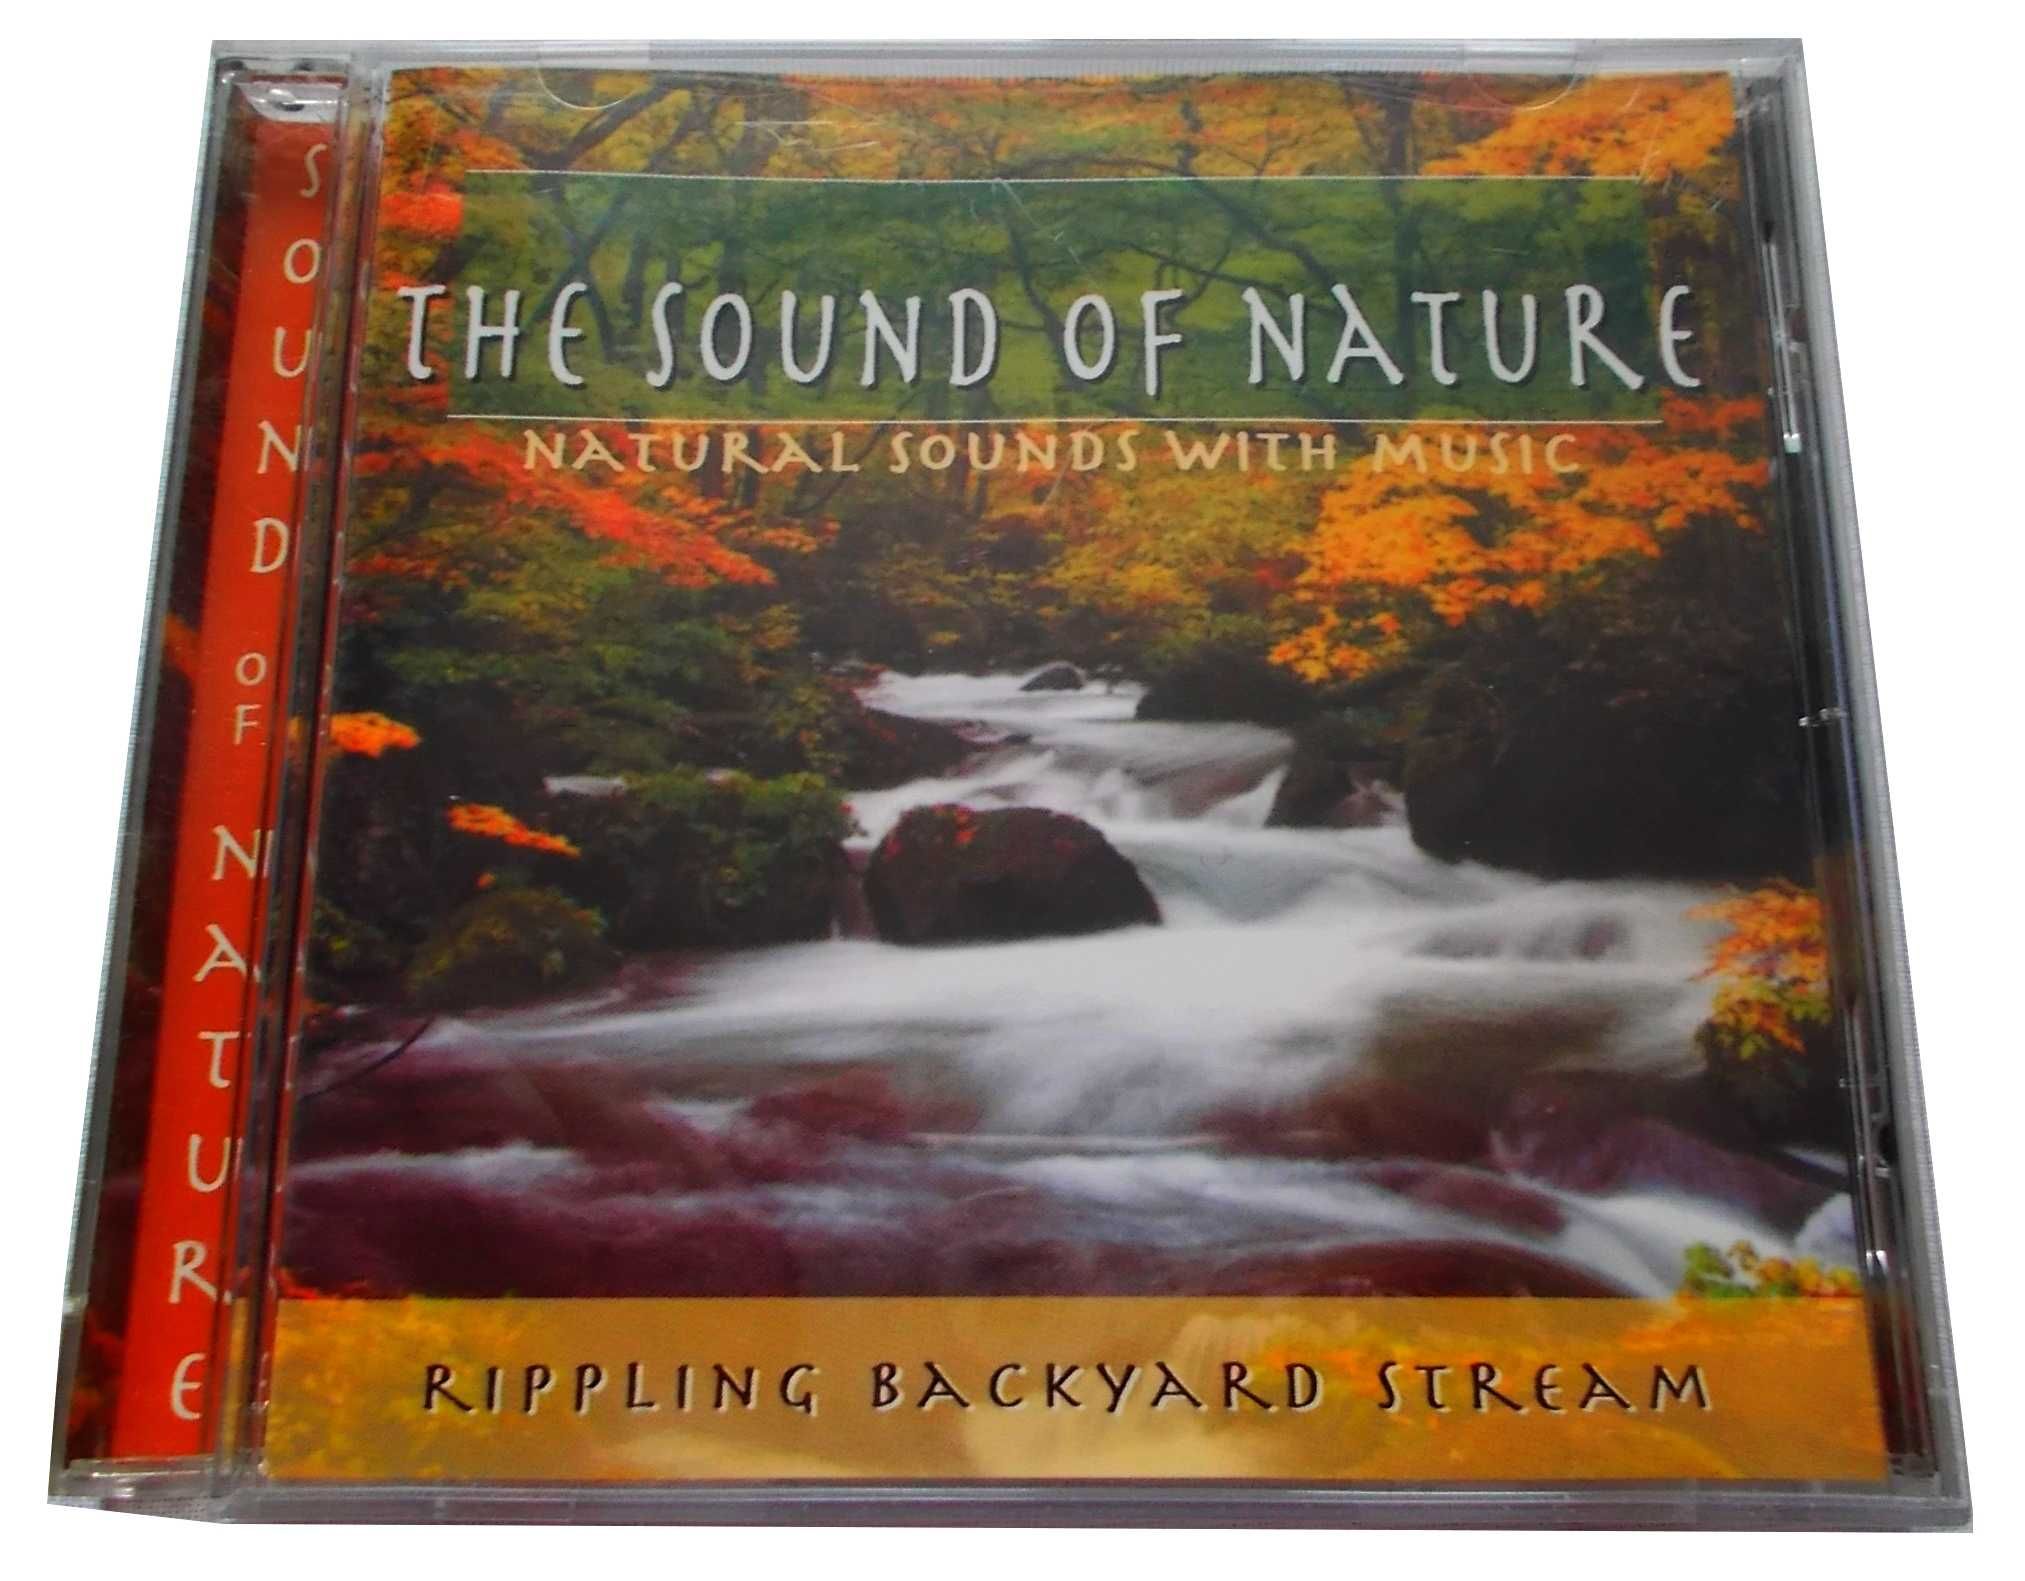 Płyta CD - Sound of Nature - Natural sounds with music - (1998r.)